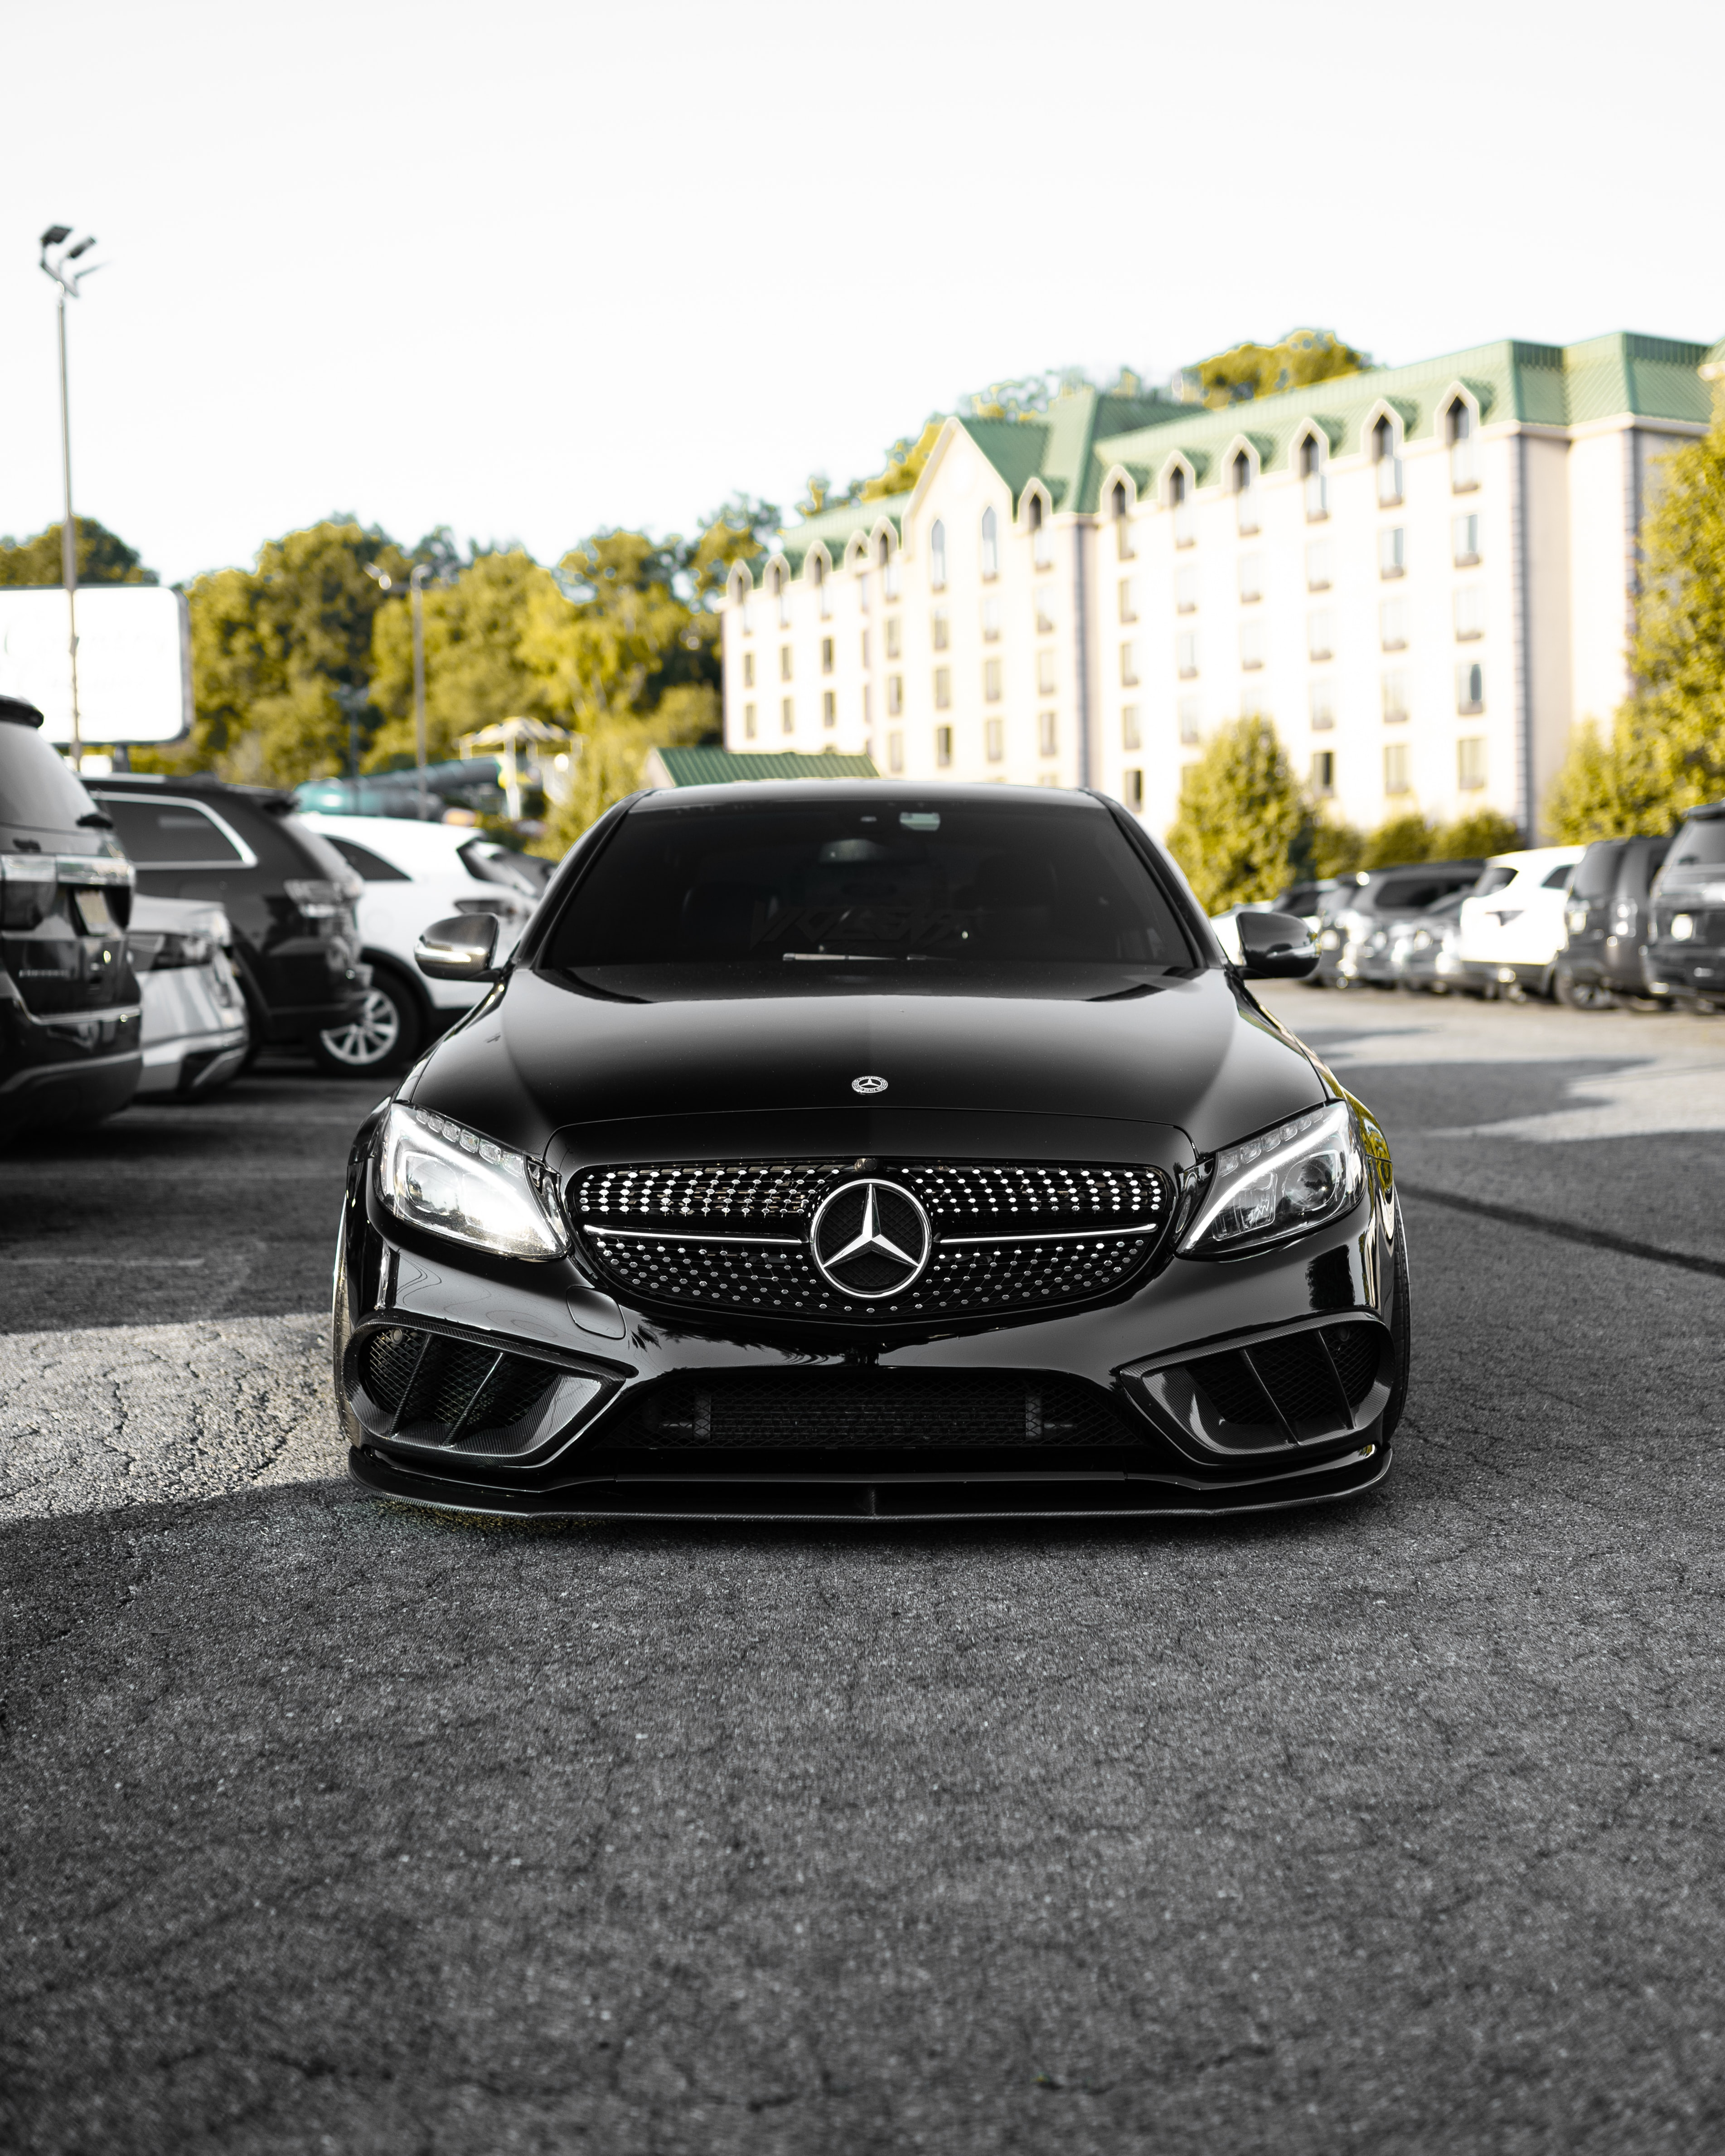 cars, black, mercedes, car, front view Aesthetic wallpaper